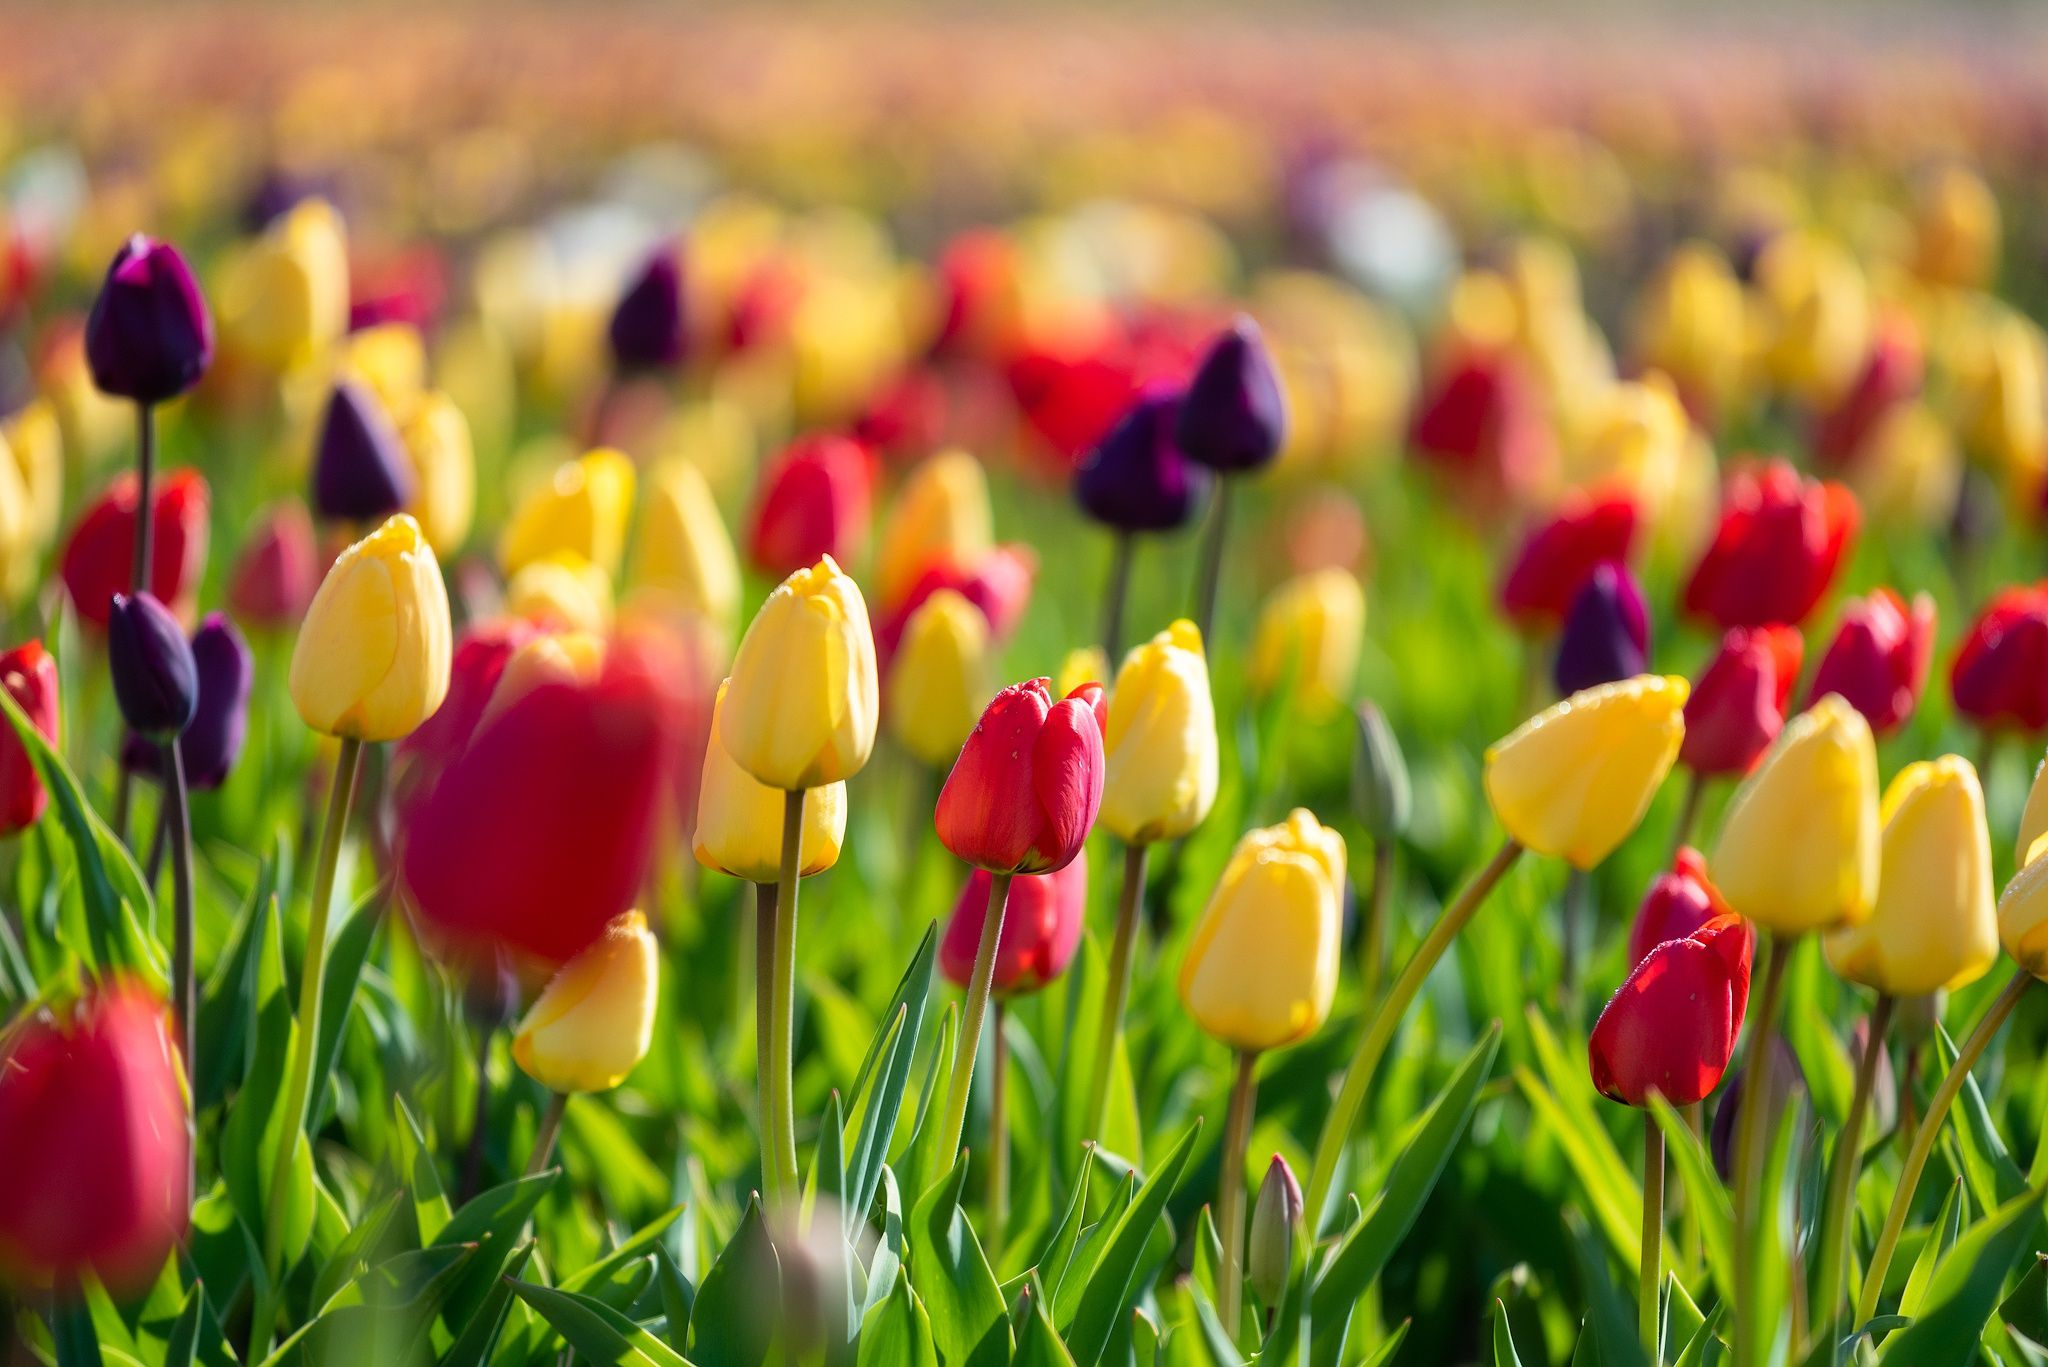 Wallpaper, colorful, spring, flowers, plants, tulips 2048x1367